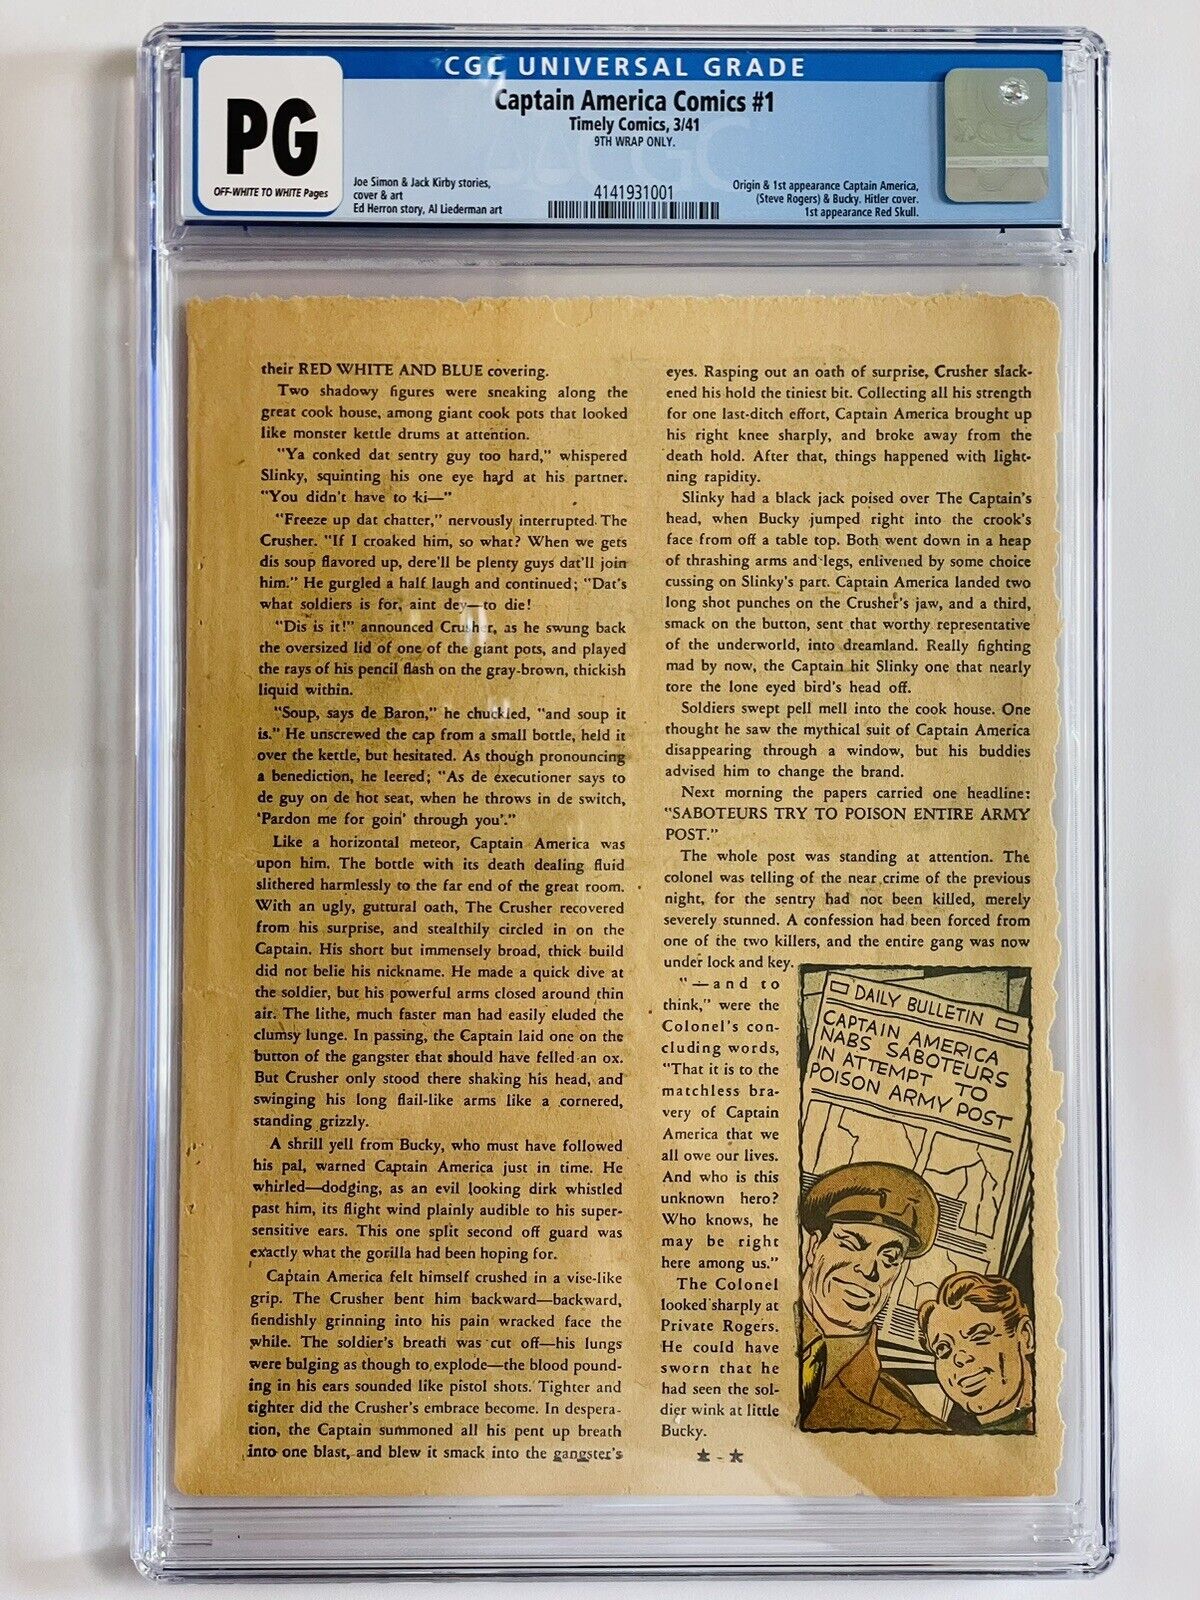 Captain America Comics #1 1941 - Timely - 9th WRAP ONLY - CGC PG Page OW/W Pages